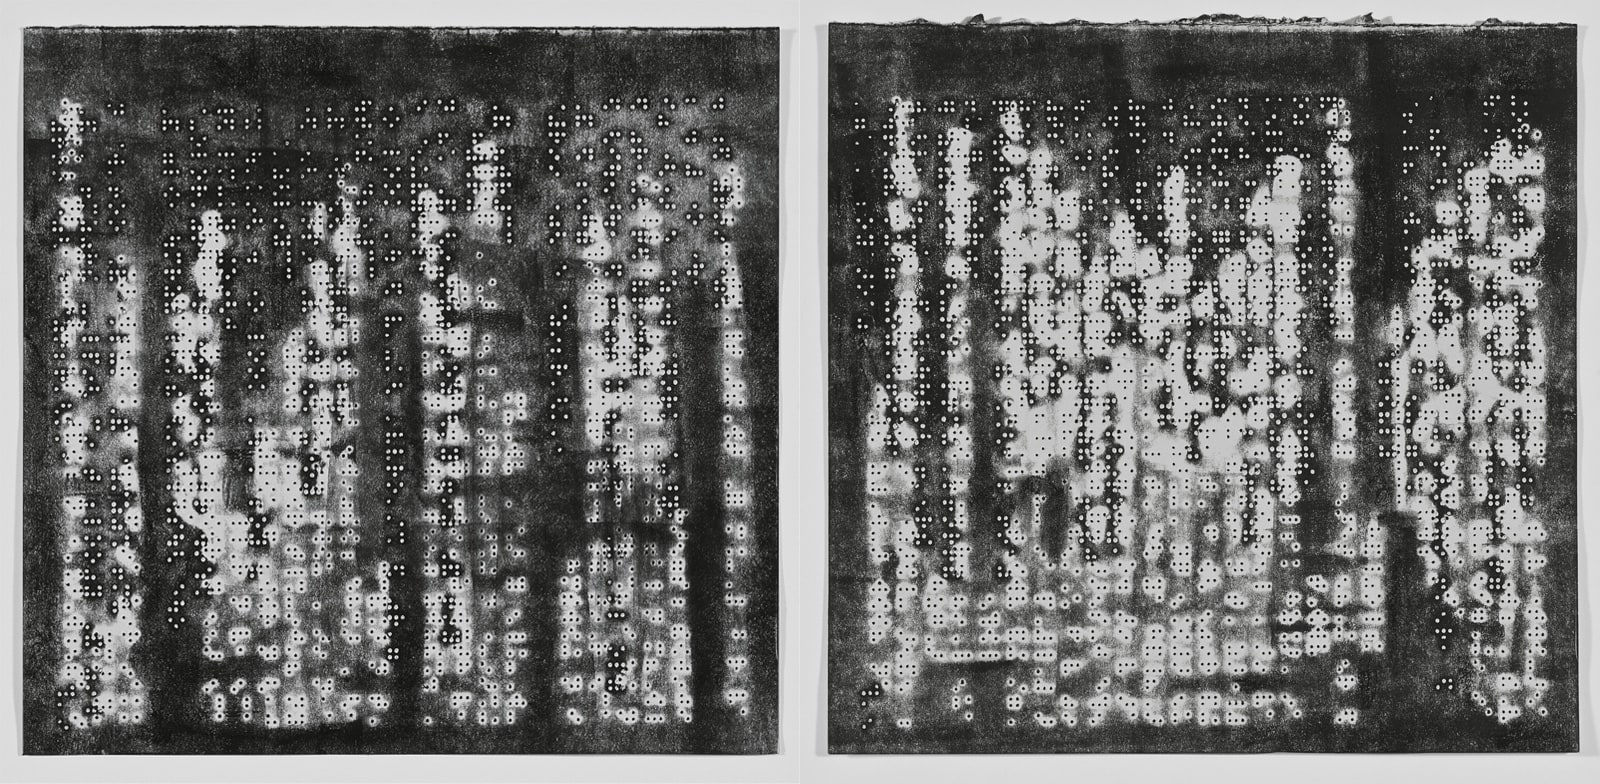 Two prints with a black background and blobs of white with tiny rectangular dots throughout like skyscraper windows at night from far away.